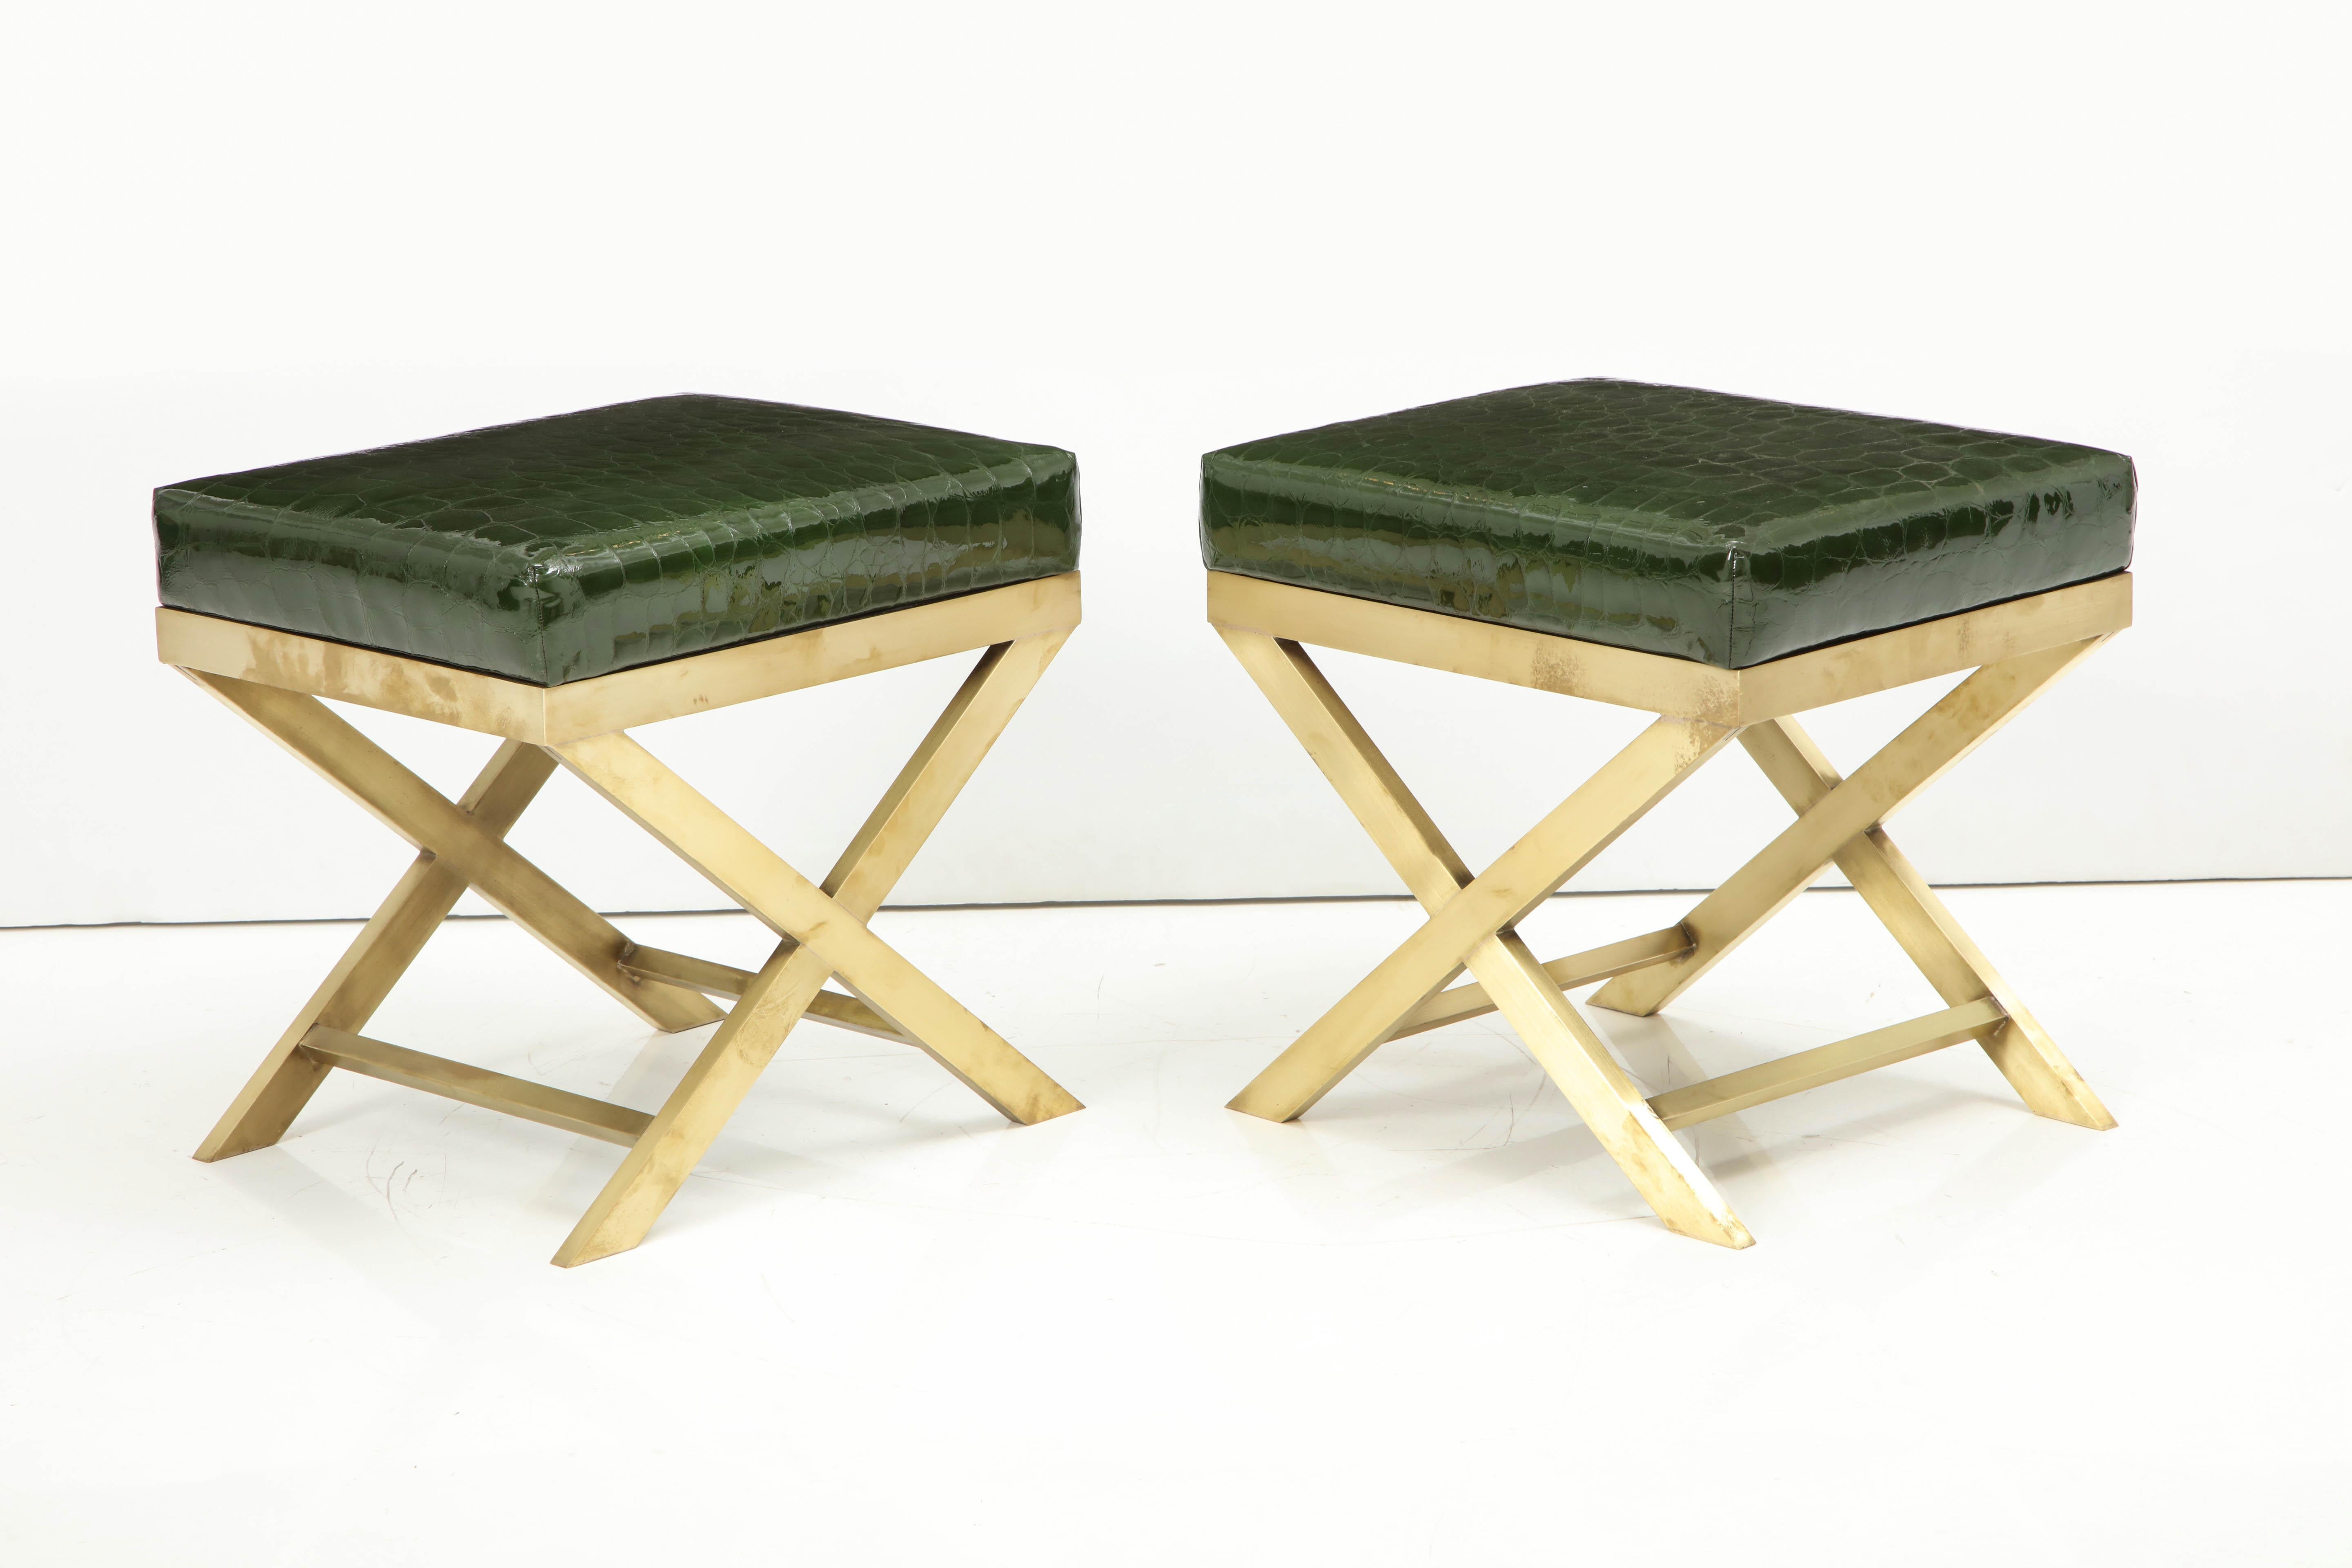 These super chic benches feature a brass base with an eye-catching green faux crocodile patent leather. This duo, perfect as extra seating or as a perch for books, will add a touch of style to any room.